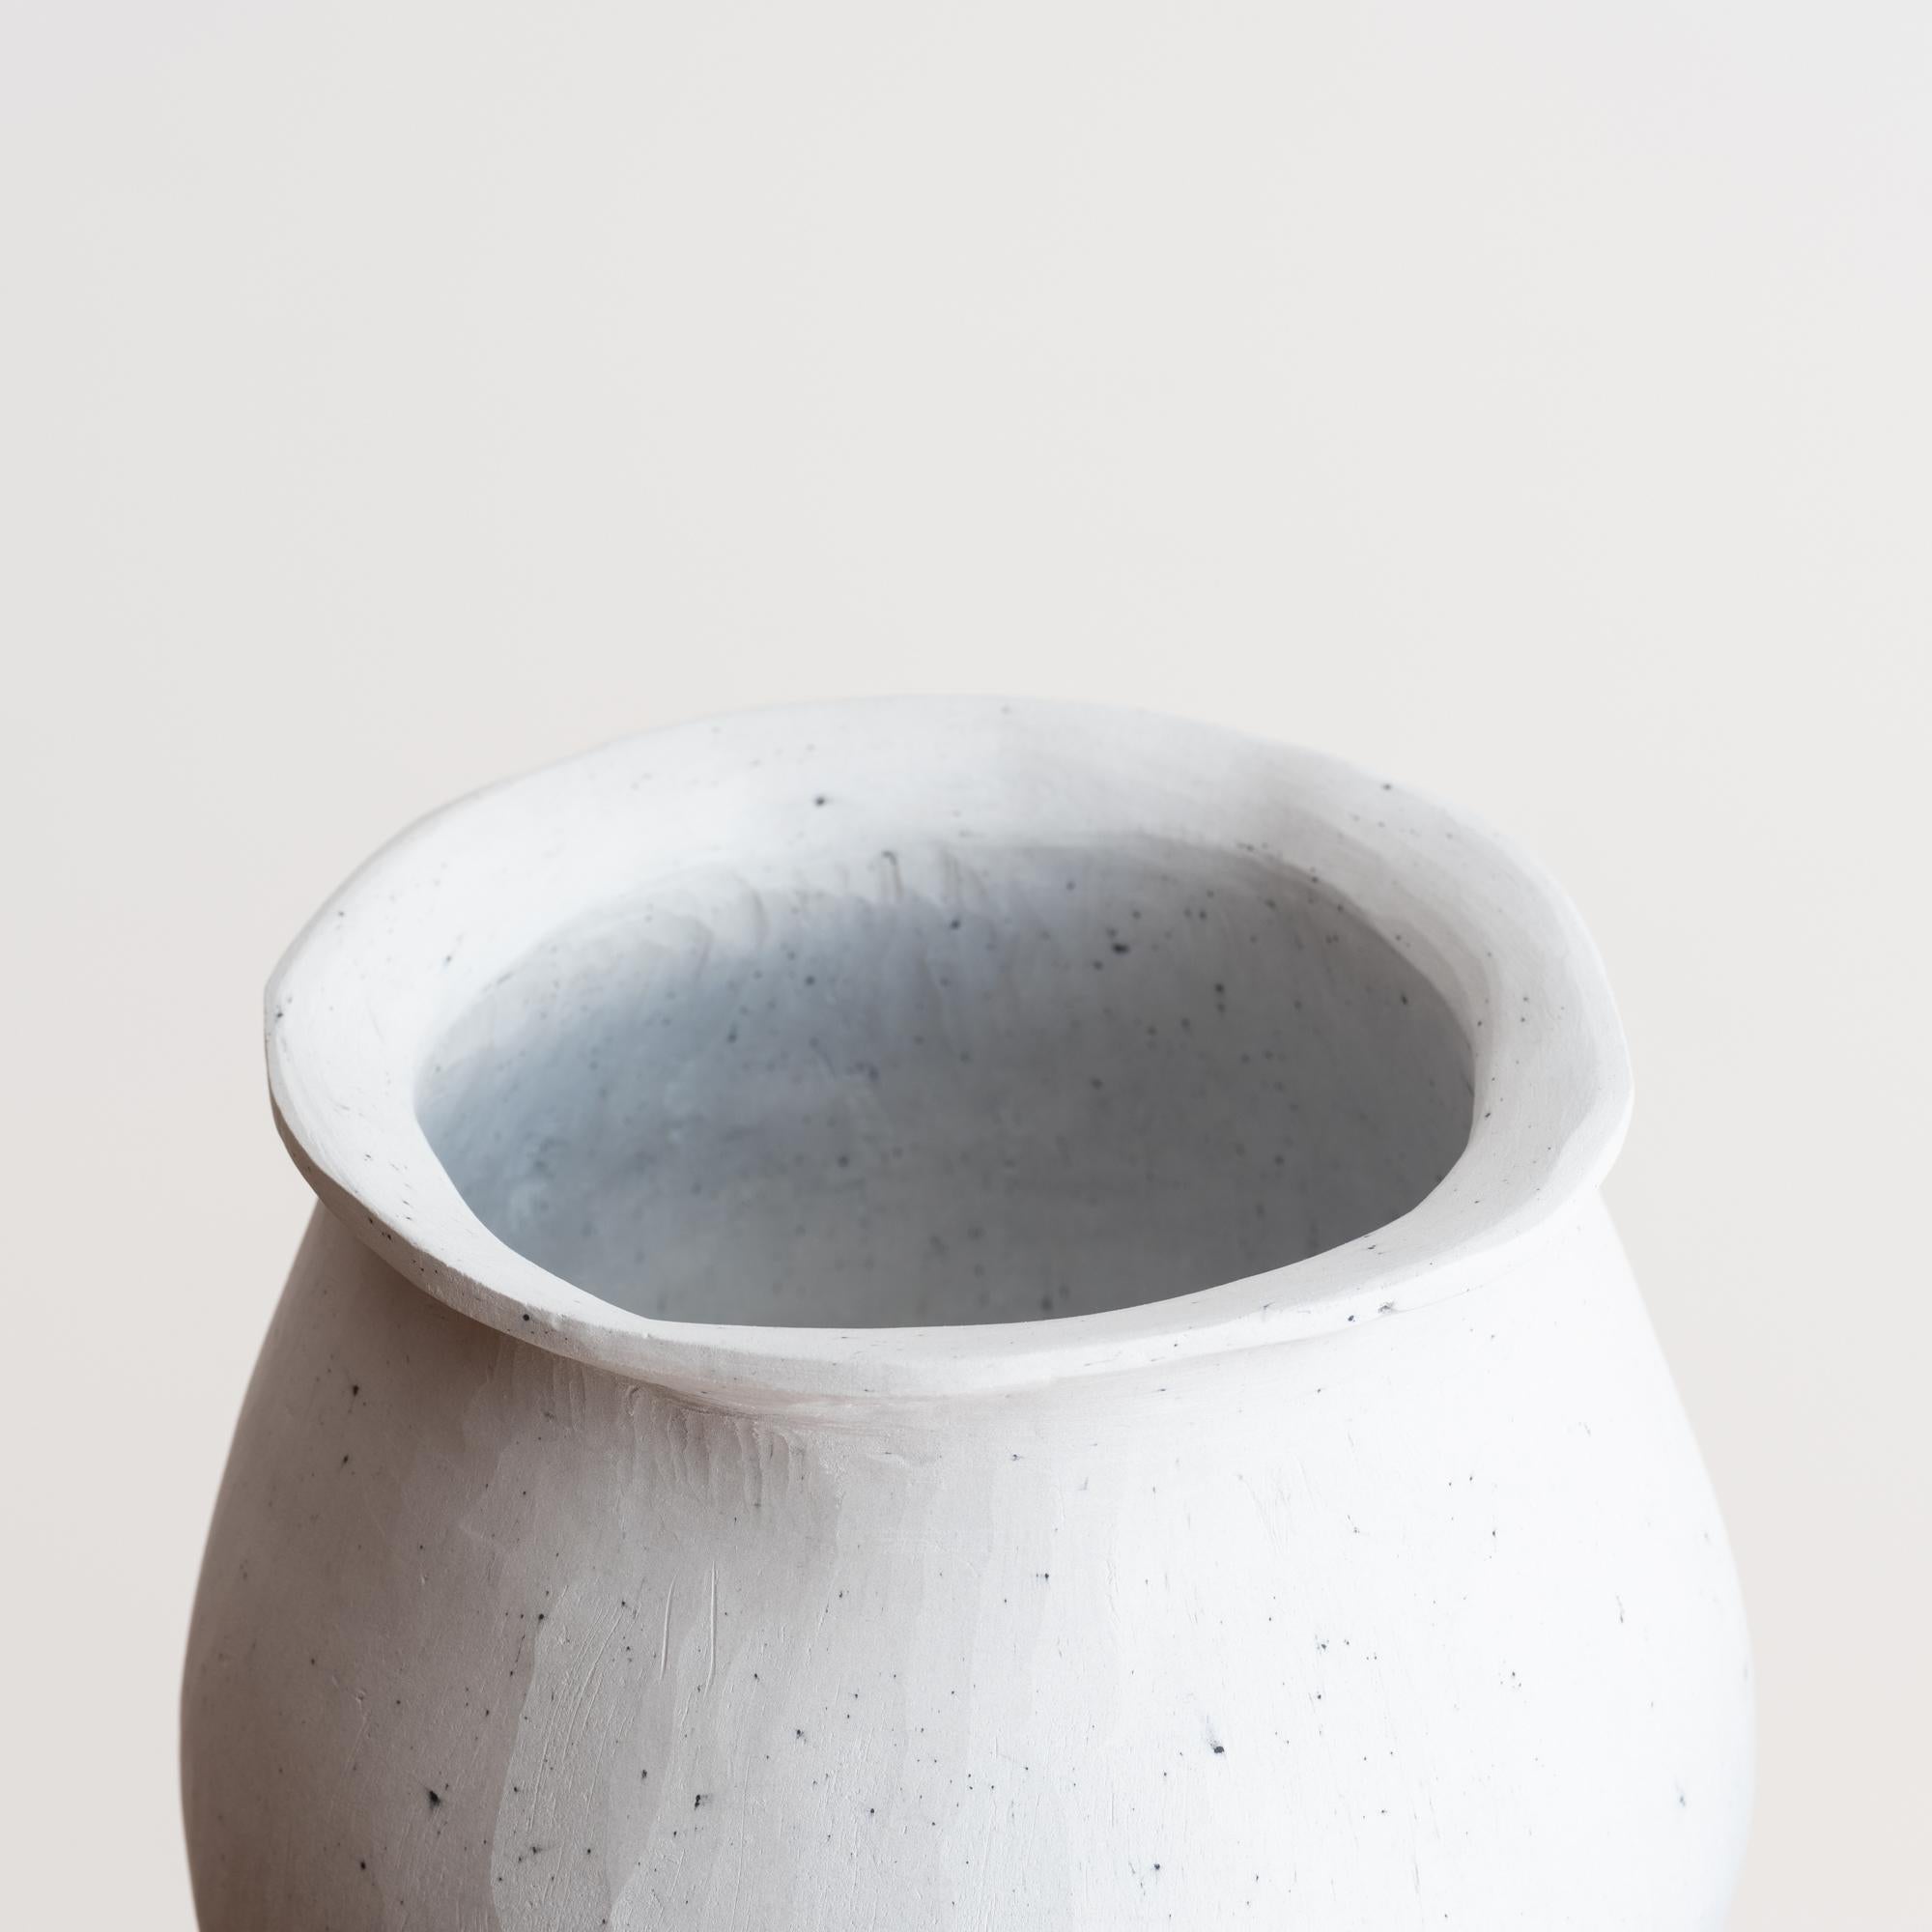 This delicate, diminutive hand-crafted porcelain vessel, entitled 'Grotto Vase,' makes a subtly beautiful addition to any room in the home. The chalky finish calls to mind the raw, tactile essence of a Giacometti plaster sculpture, while the serene